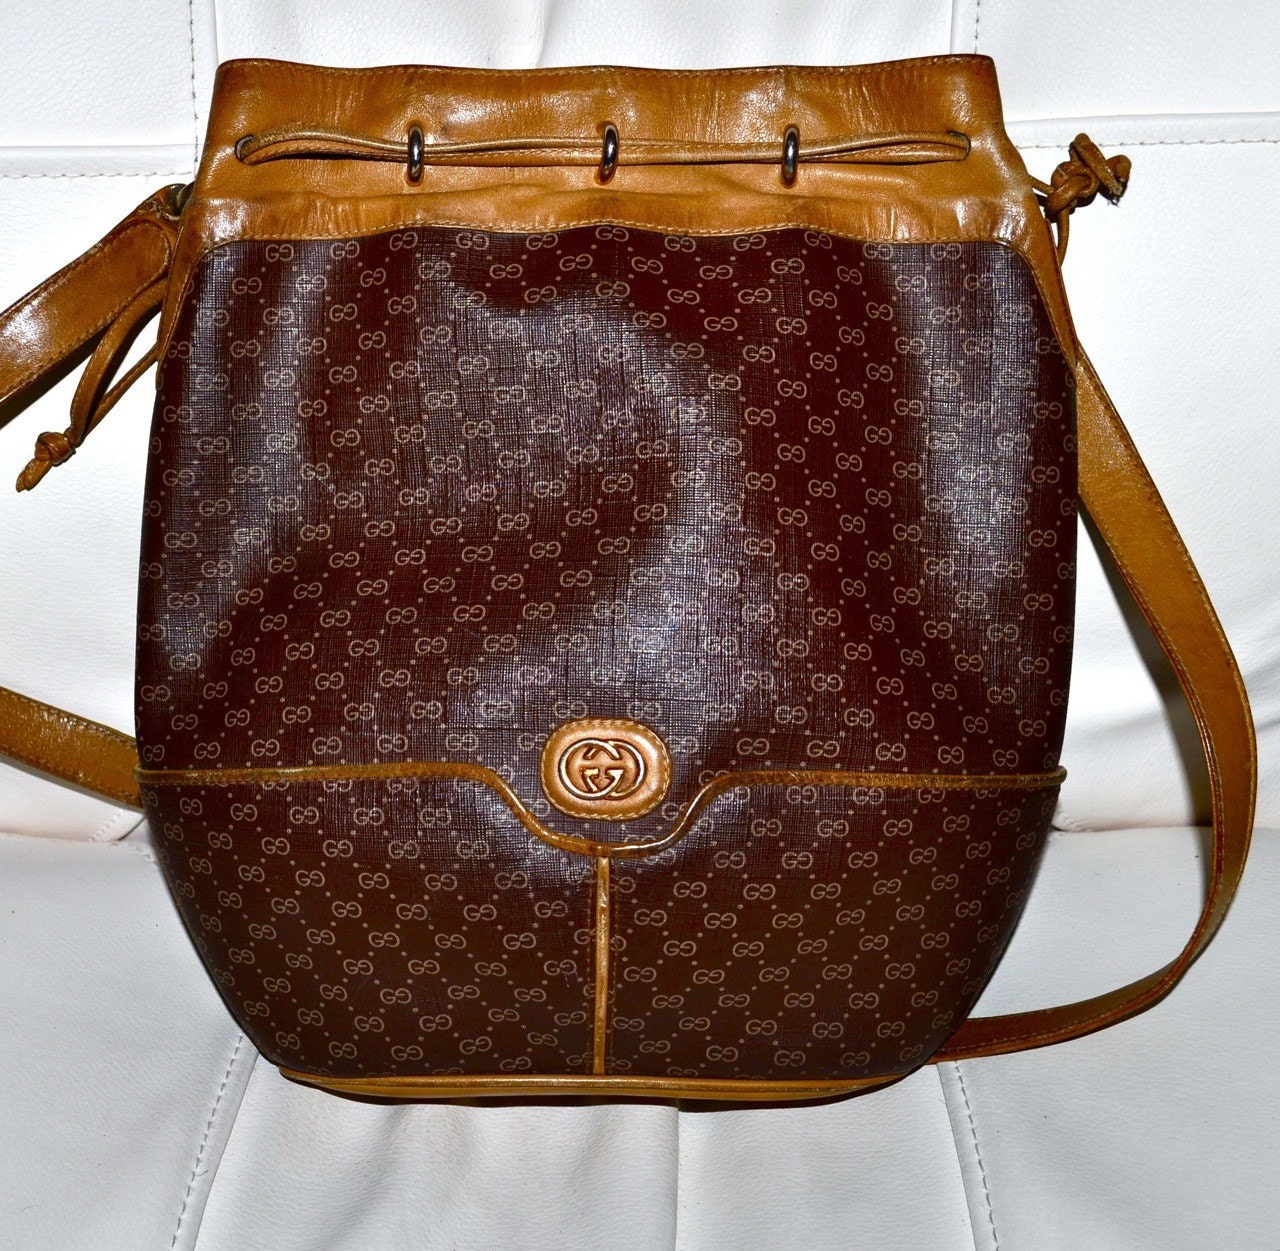 GUCCI LOT of 2 Vintage 1980s HANDBAGS GG Monogram by louise49